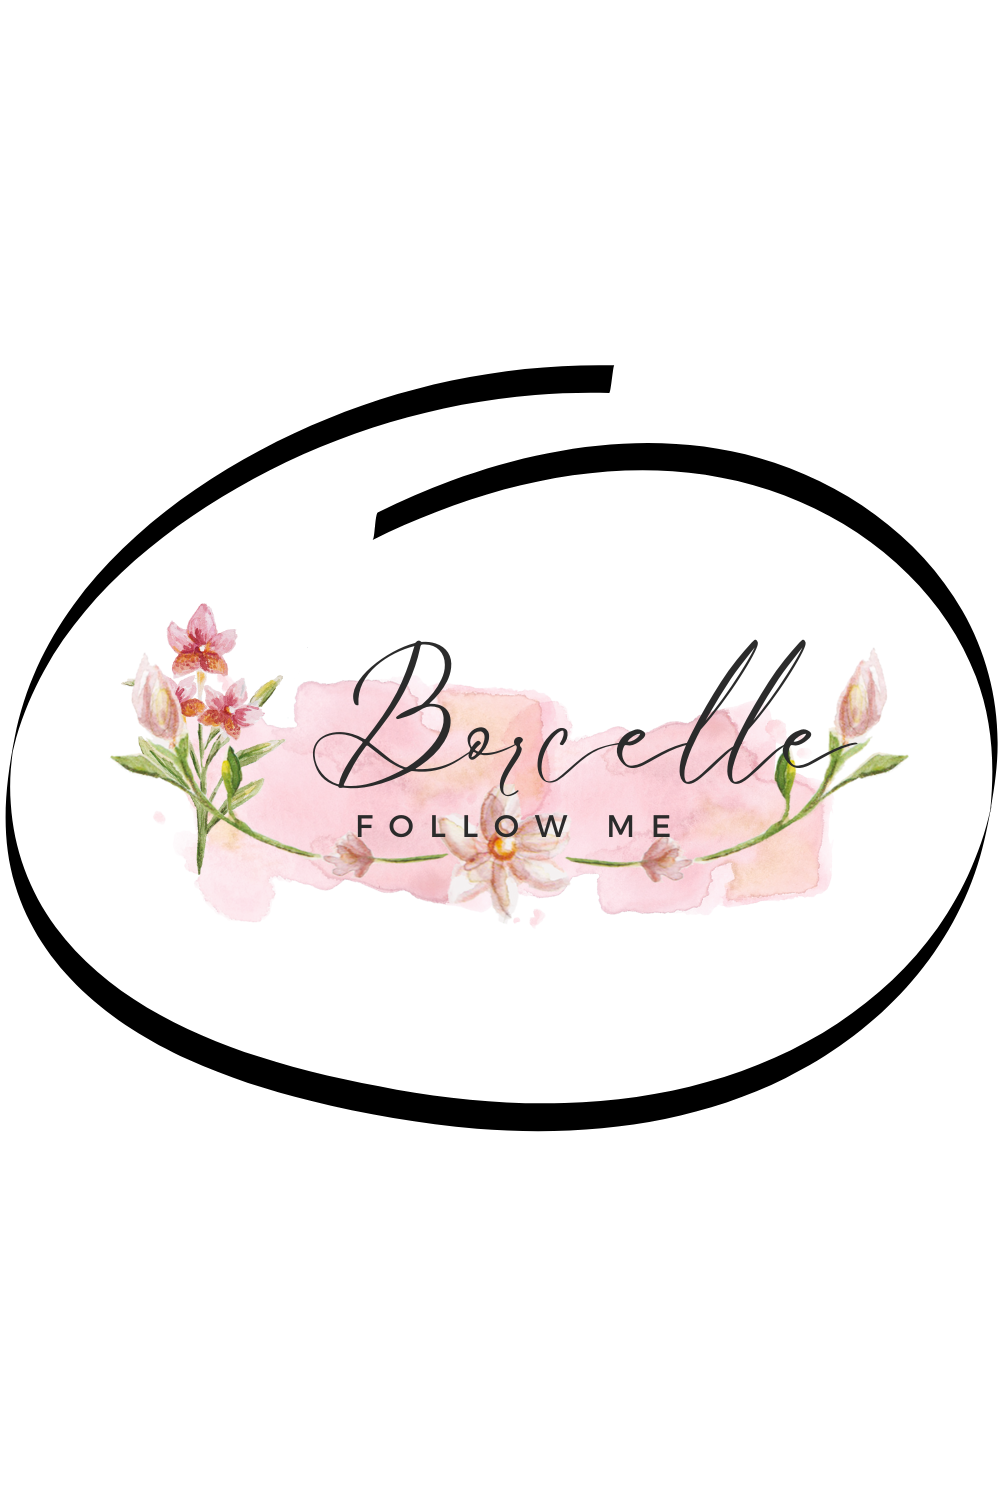 Chic Watercolor Floral Emblem with Modern Calligraphy pinterest preview image.